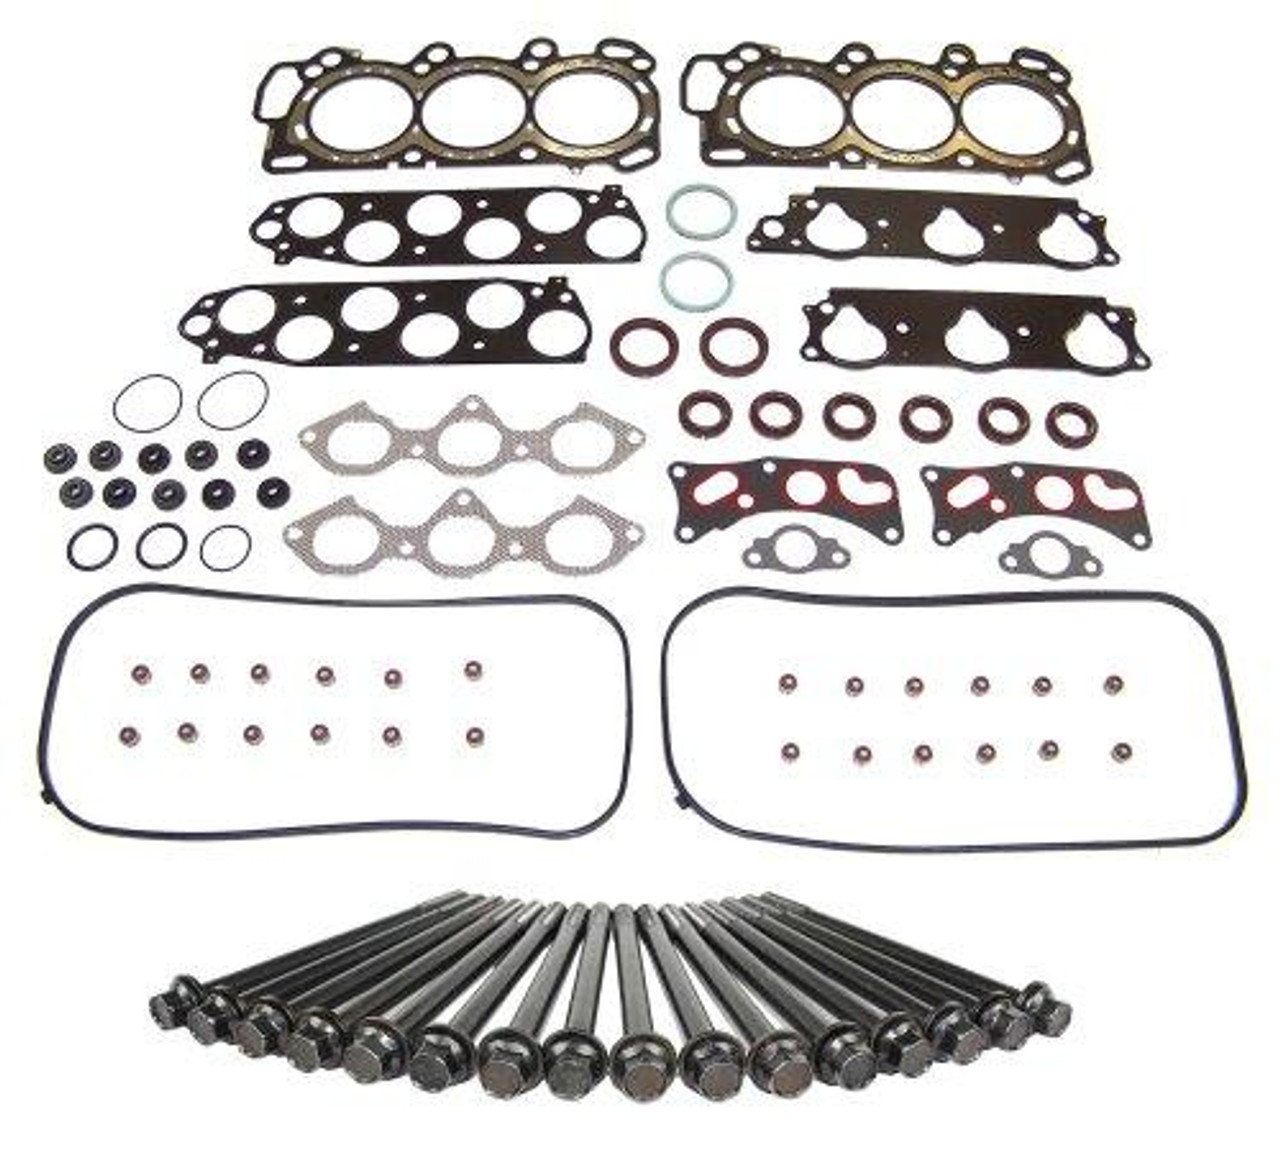 Head Gasket Set with Head Bolt Kit - 2002 Acura CL 3.2L Engine Parts # HGB2601ZE2